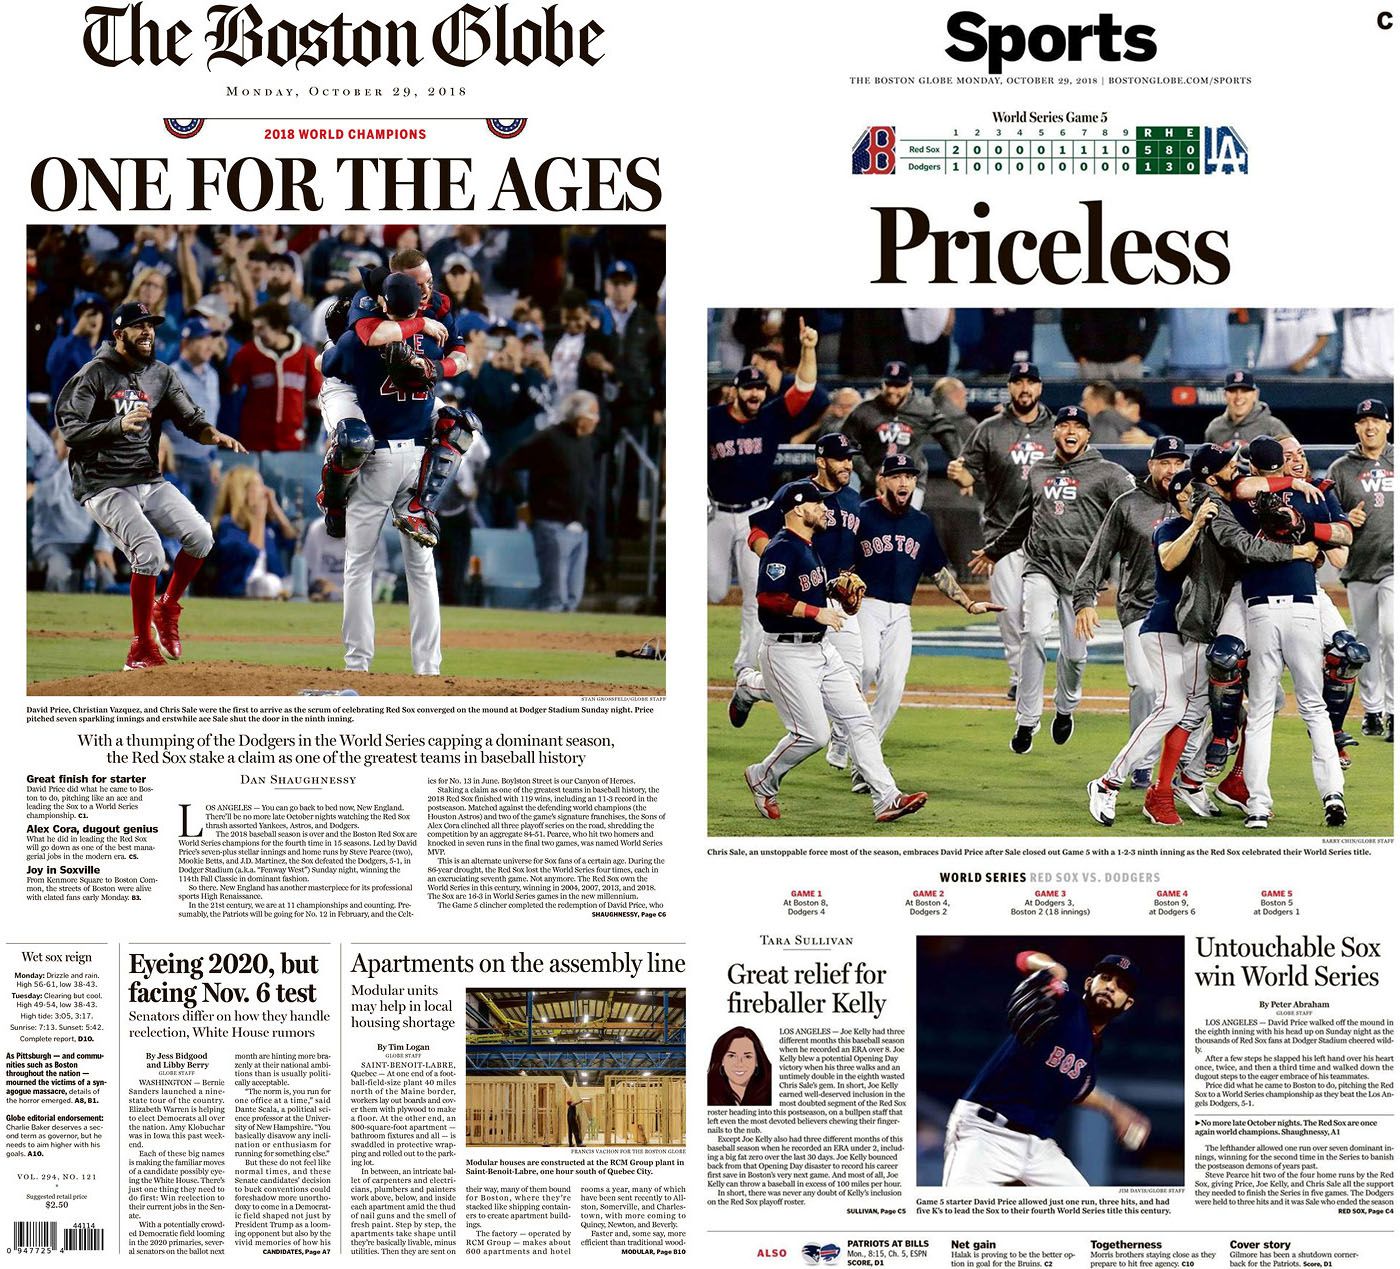 Red Sox Win 2013 World Series! - New England